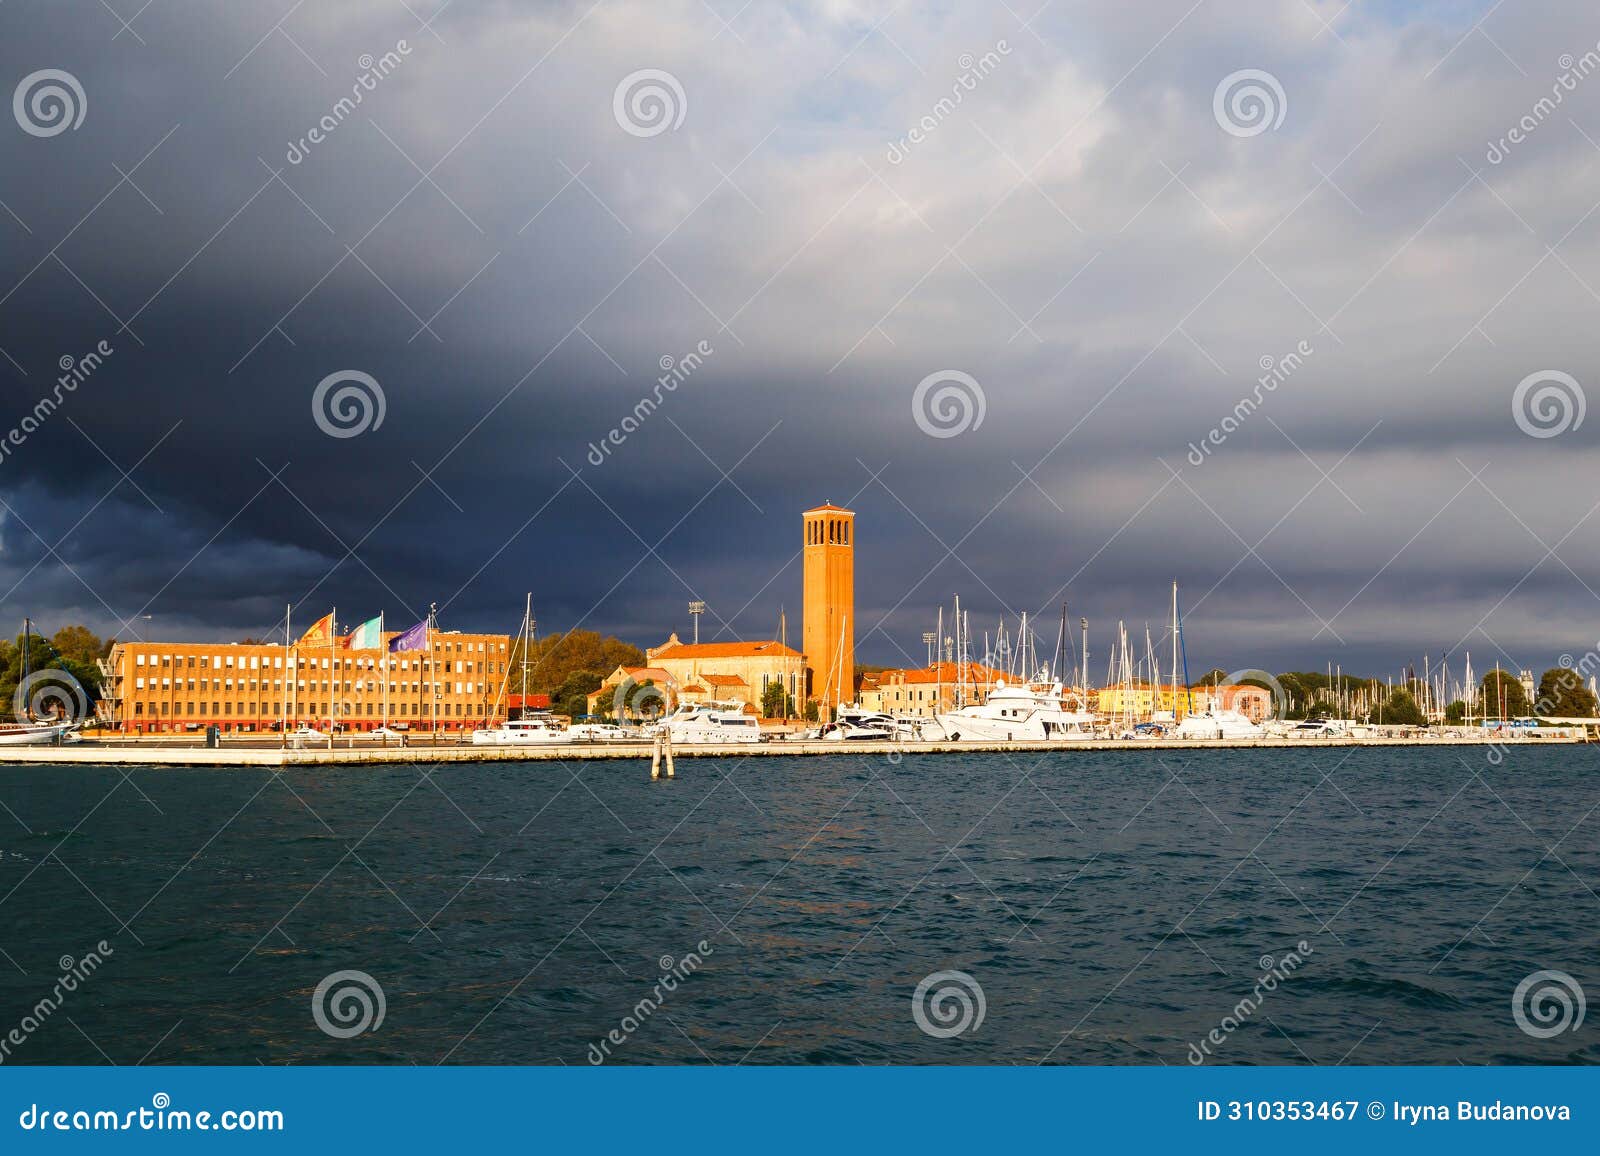 bell tower of sant'elena church and yacht harbor at extreme east end of sestiere of castello in venice, italy. view